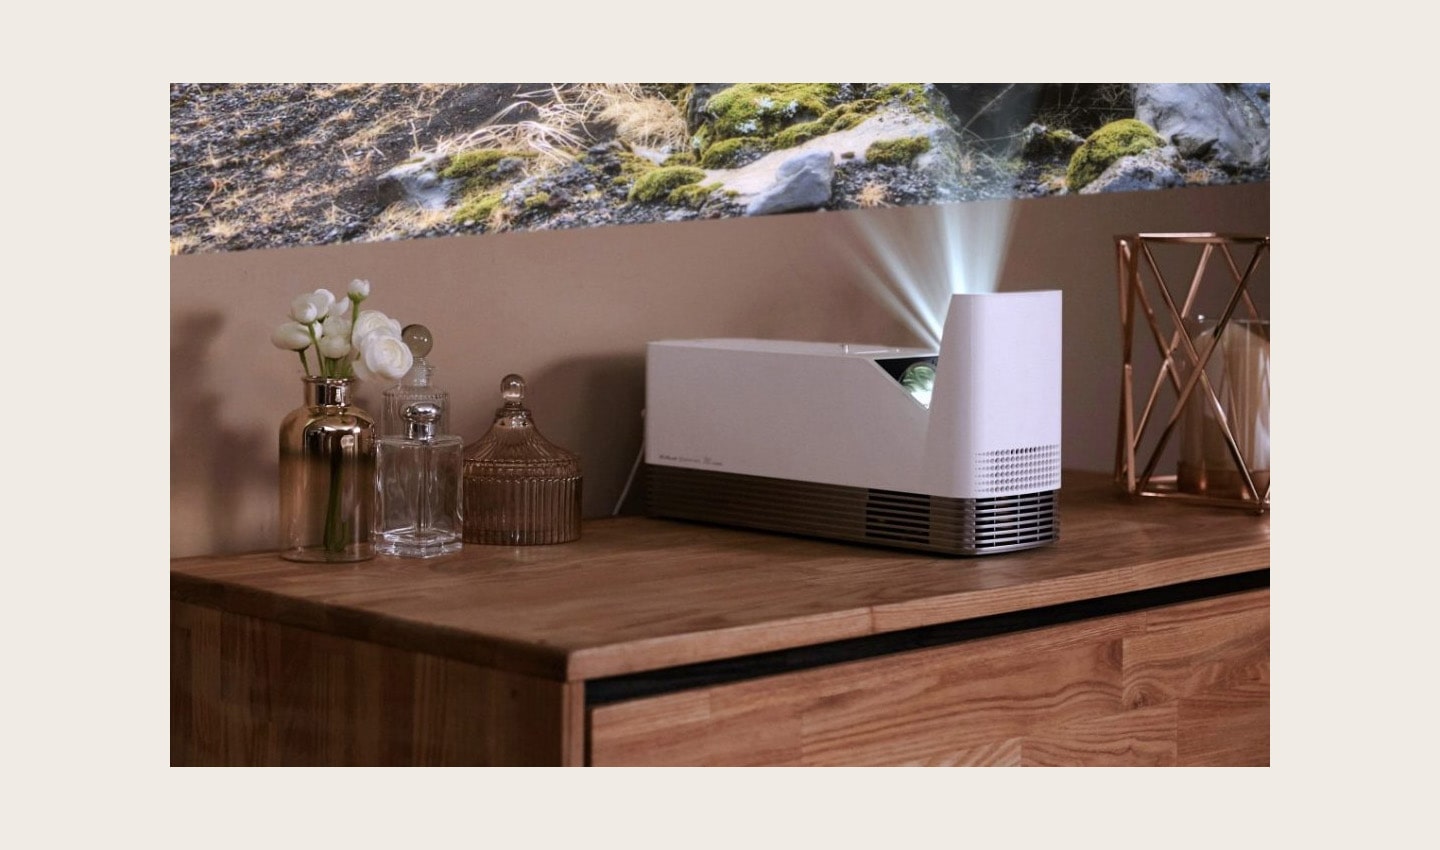 An LG ProBeam Projector HF85J is put next to some perfumes on a cabinet, projecting an image on the wall.